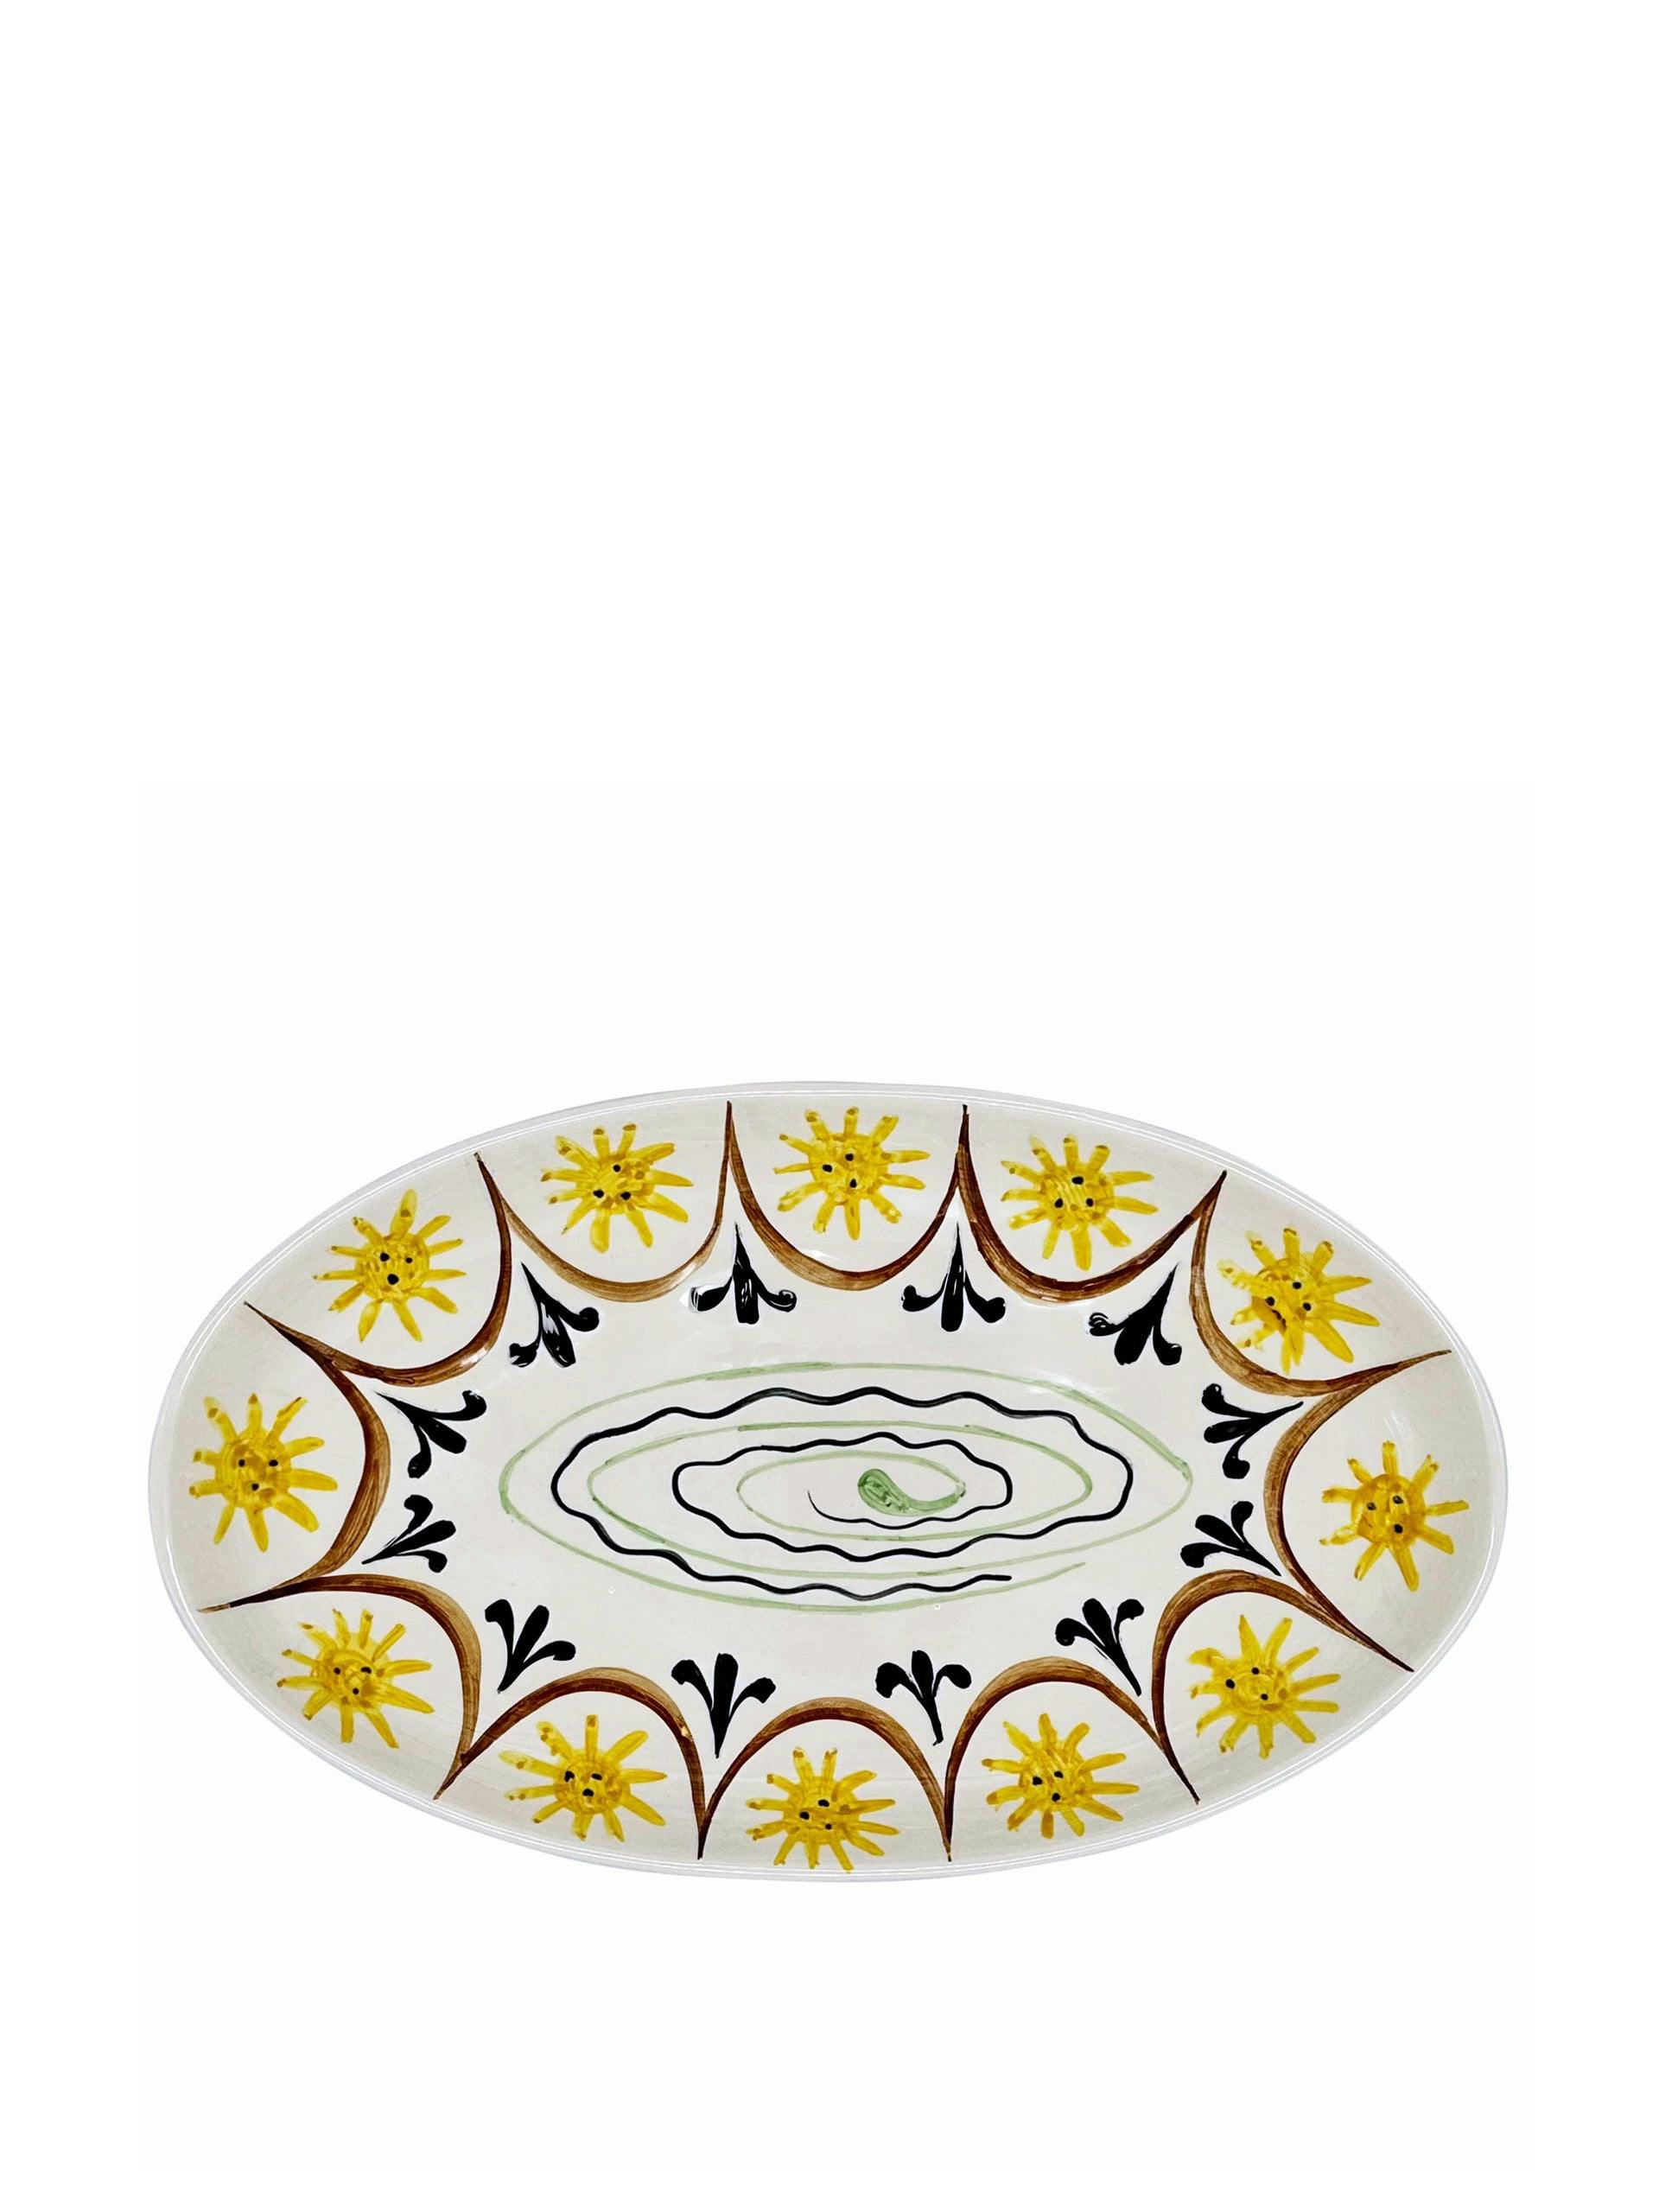 Collagerie x Villa Bologna Pottery large scalloped oval platter